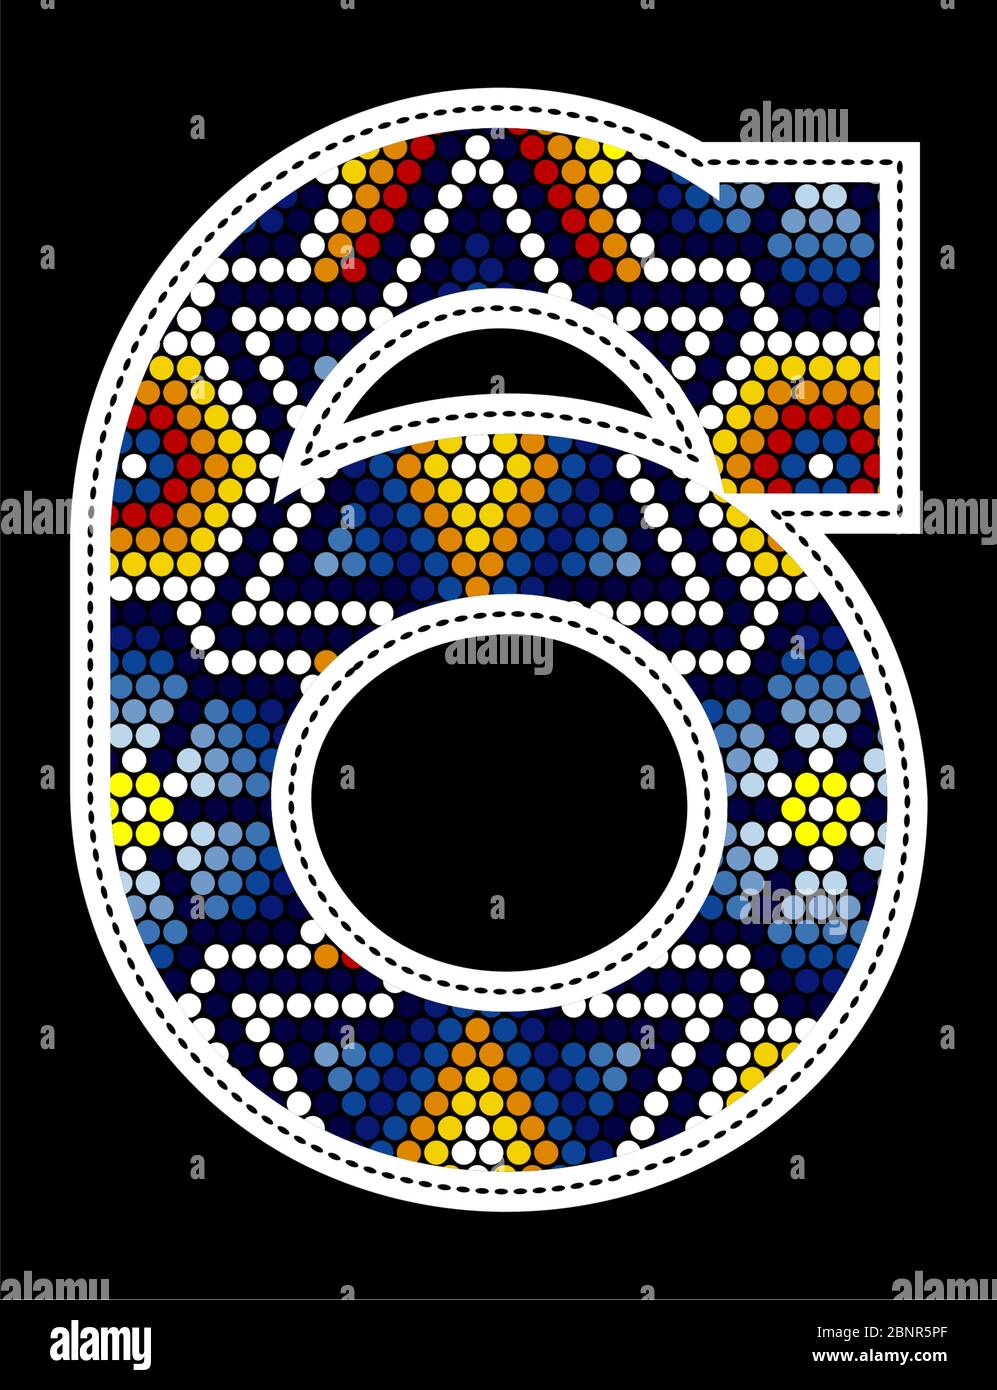 number 6 with colorful dots abstract design inspired in mexican huichol art style isolated on black background Stock Vector